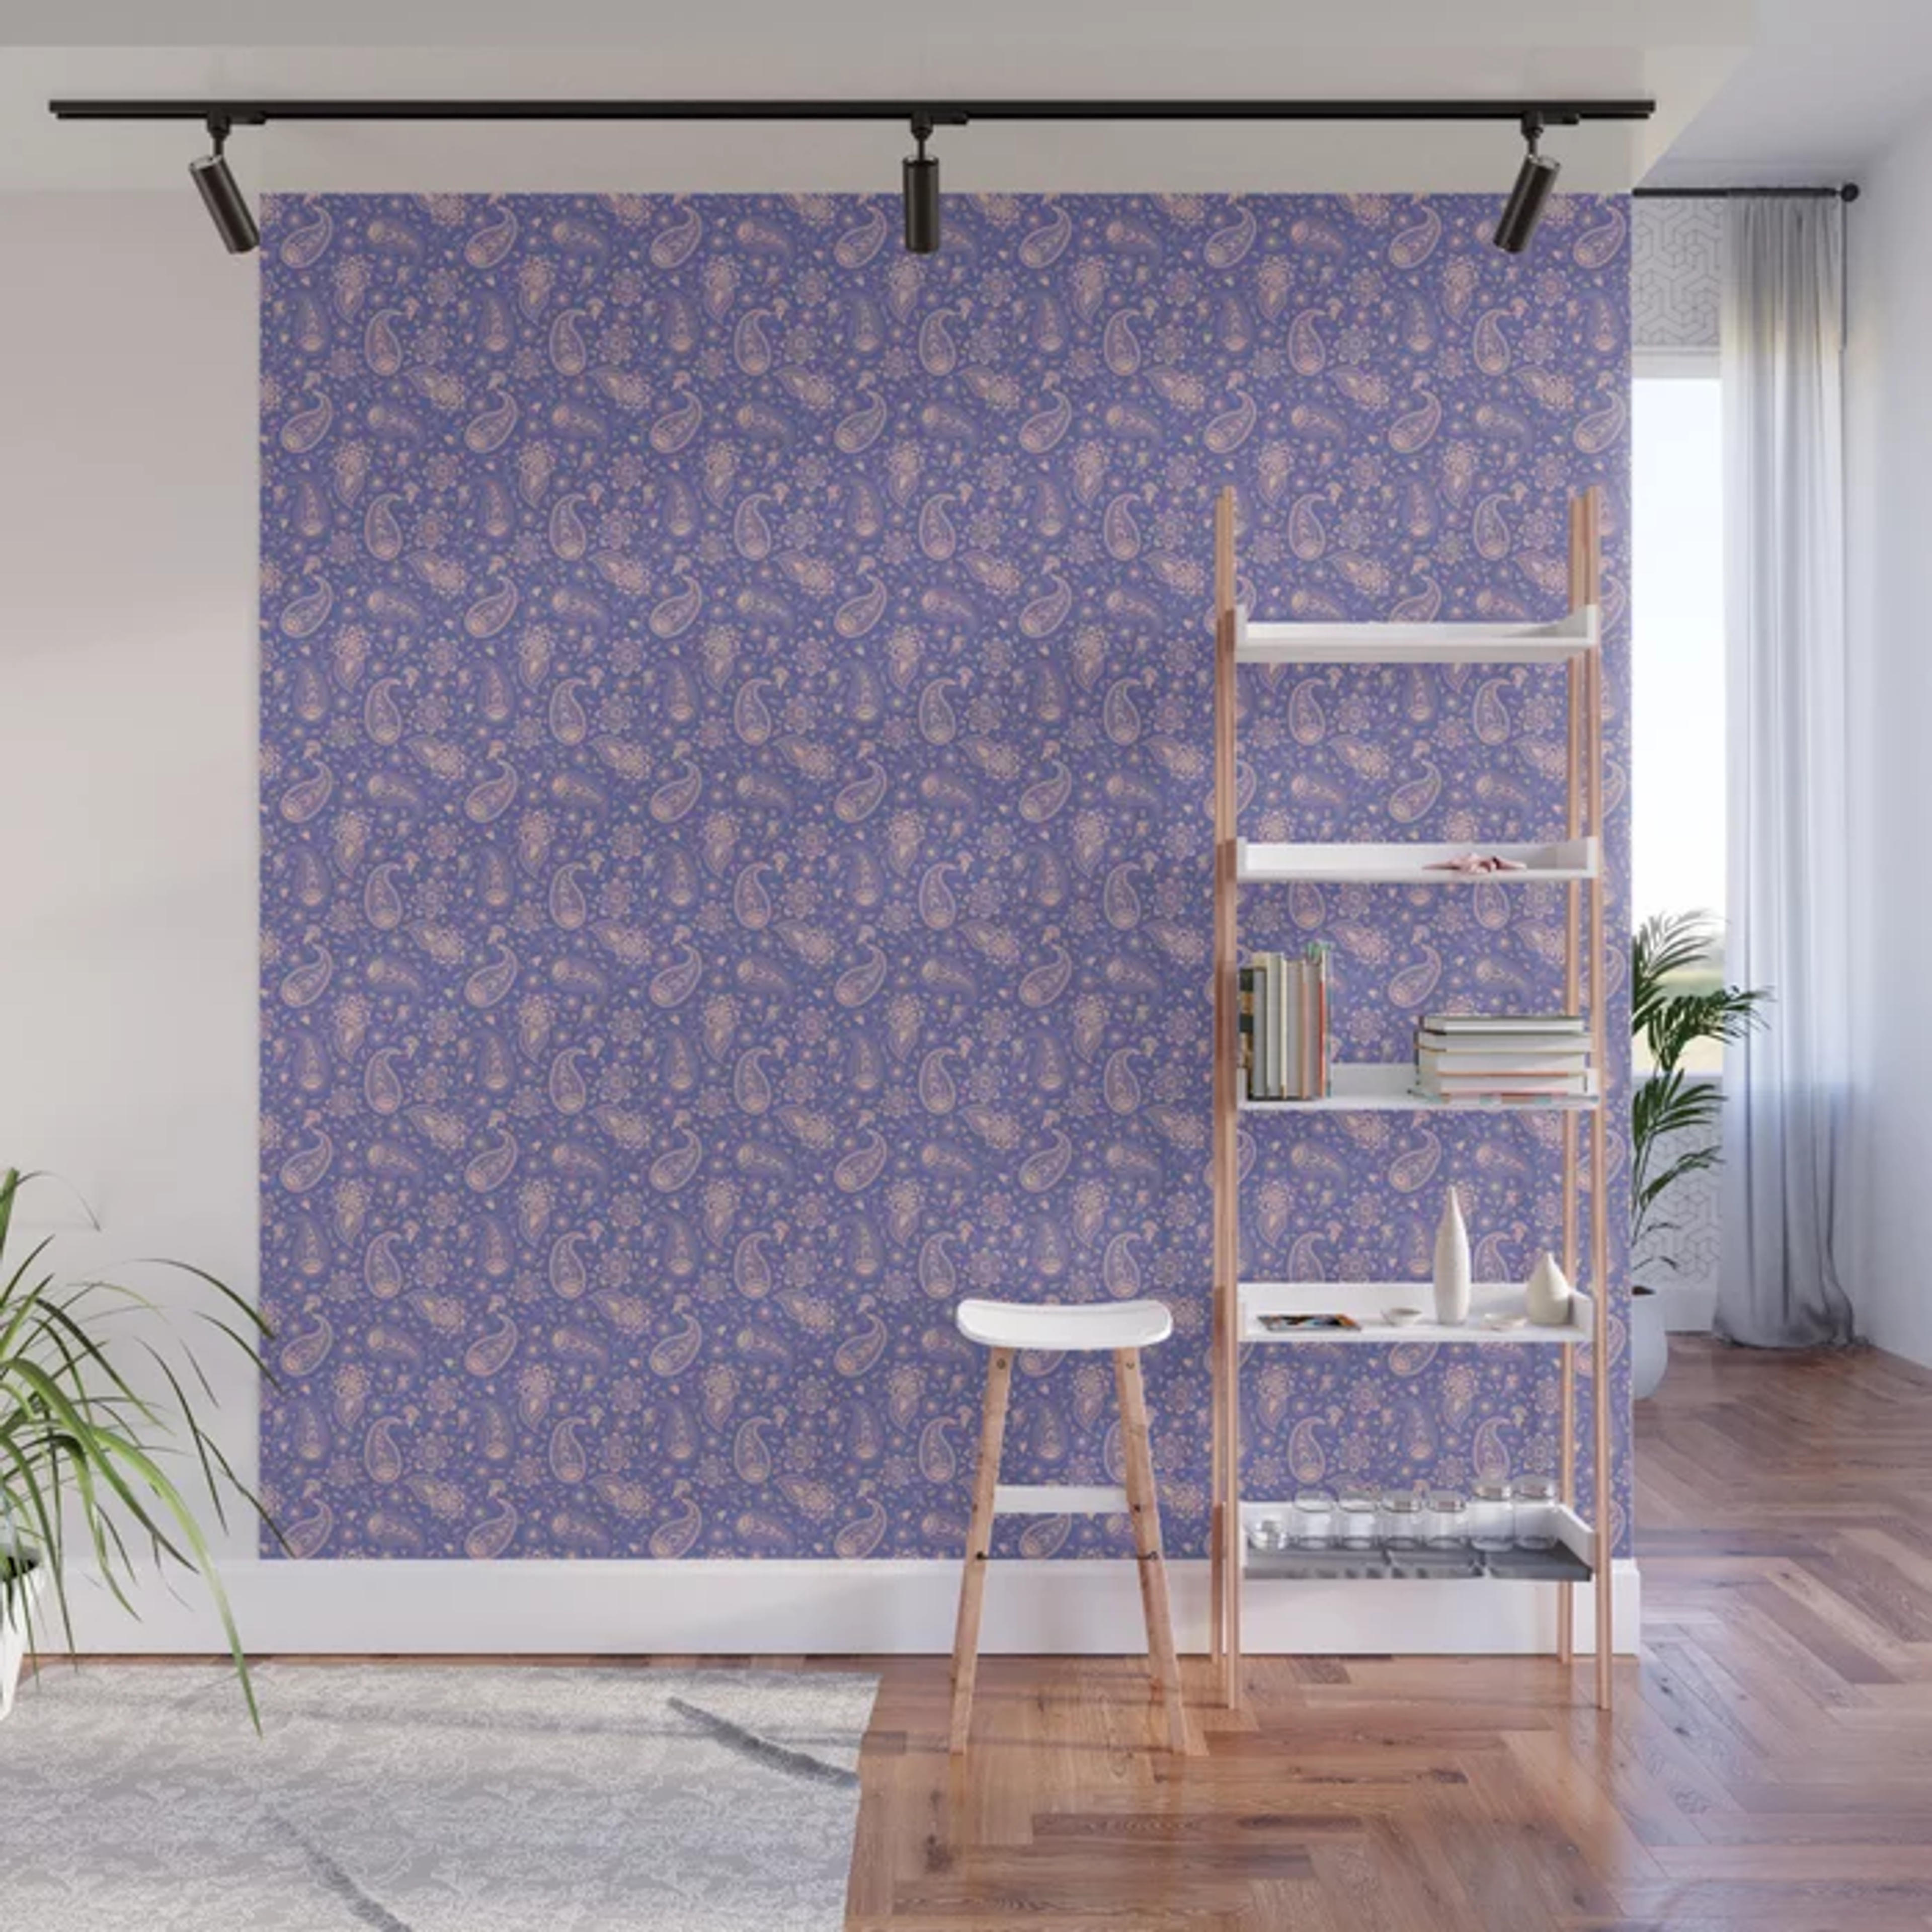 PANTONE Very Peri 2022 Trend Color Floral Seamless Moroccan Style Pattern Wall Mural by Arteresting Bazaar | Society6